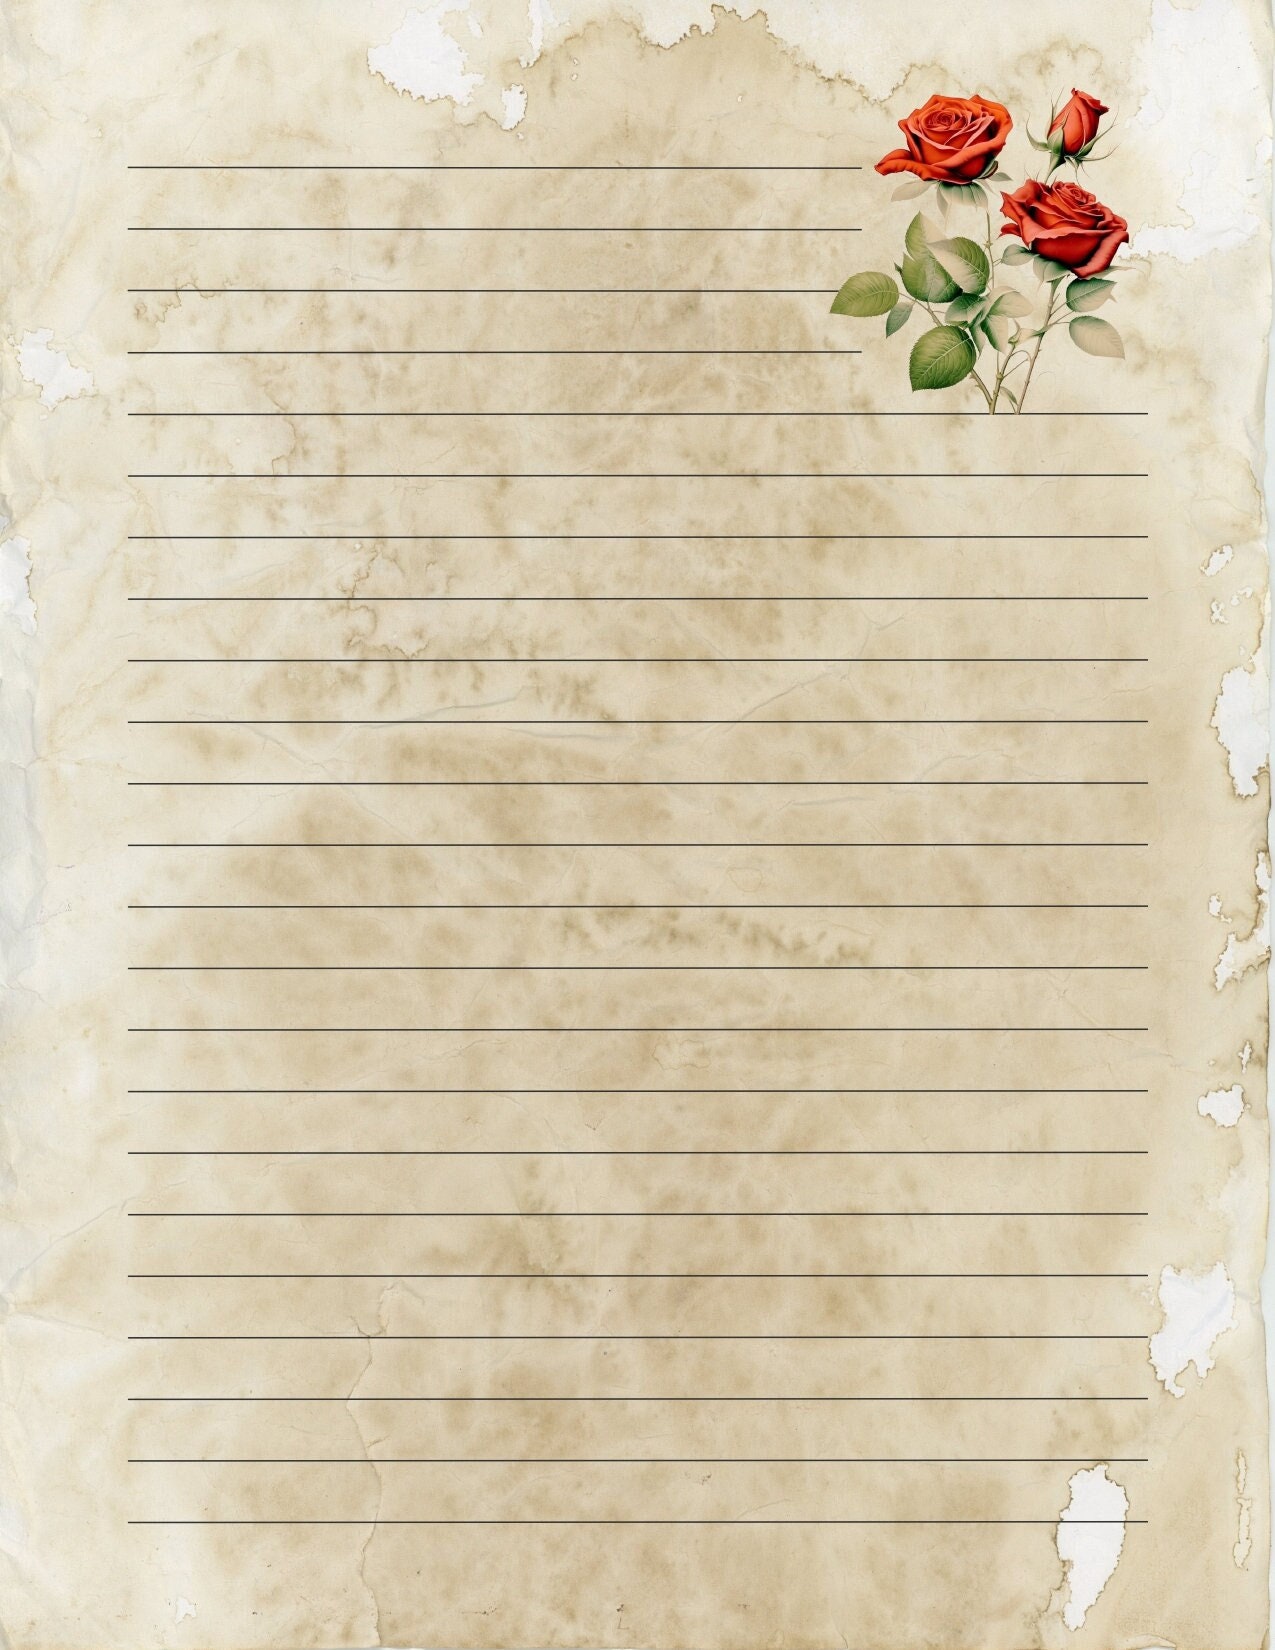 Retro Vintage Design Parchment Unlined and Lined Writing